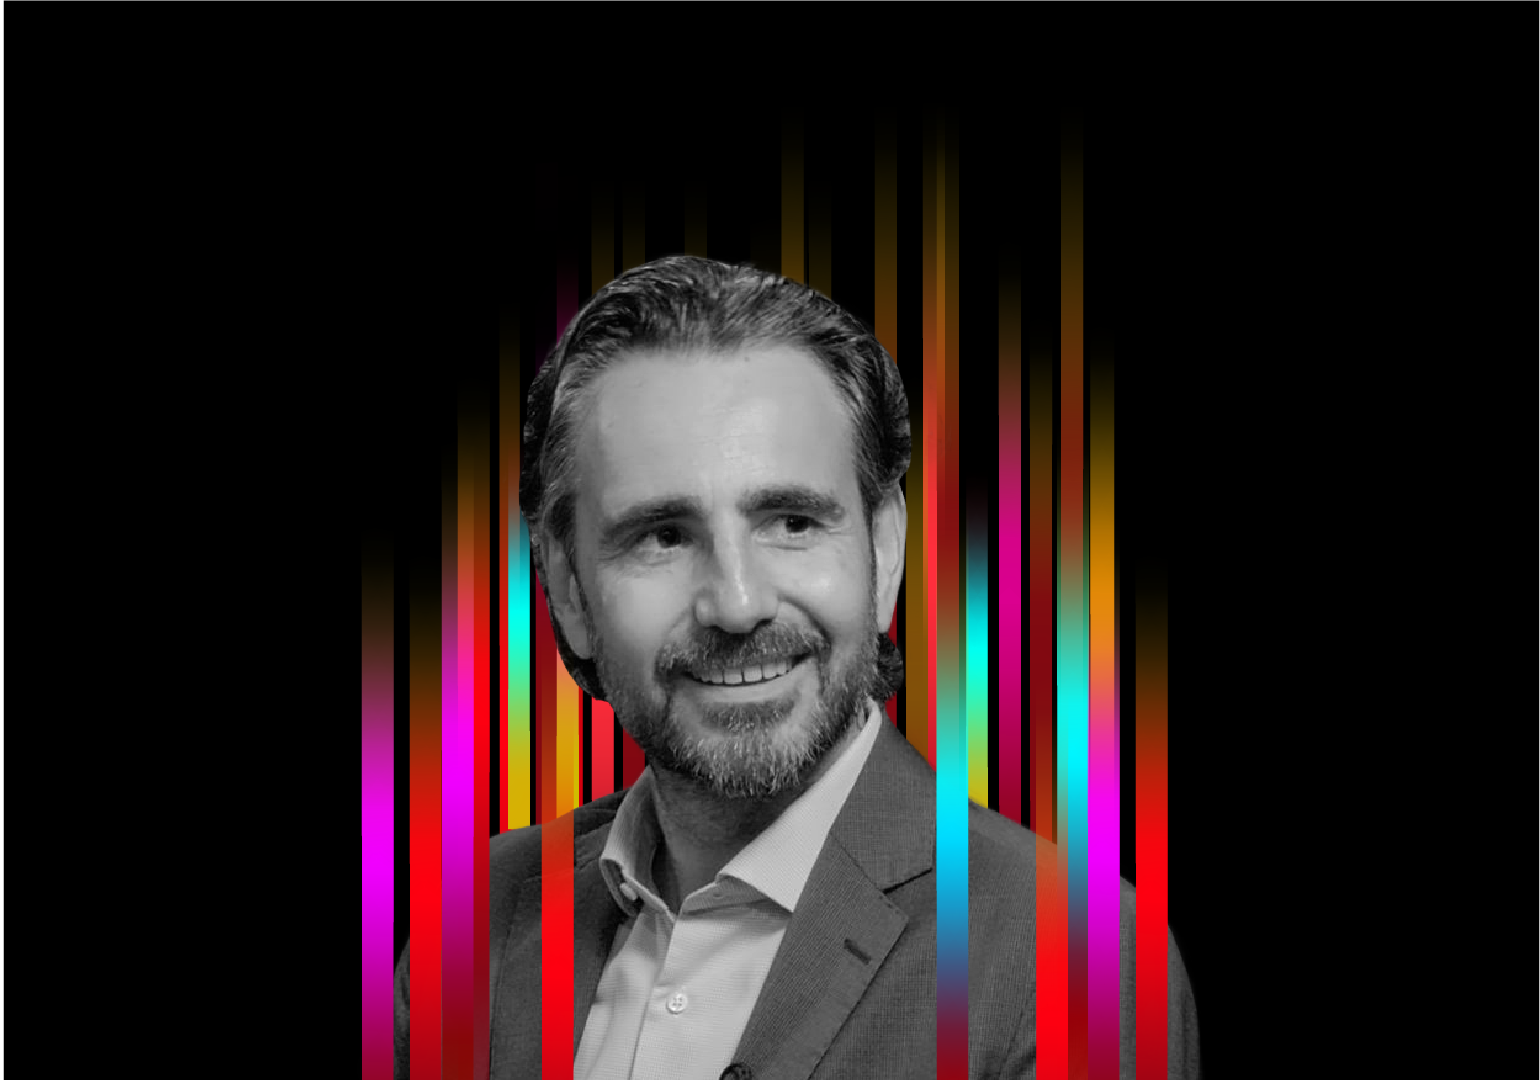 On the middle of a black background is a row of colourful vertical stripes’. In the centre is a black and white profile photo of TEDx speaker Eric Lonergan superimposed on top.